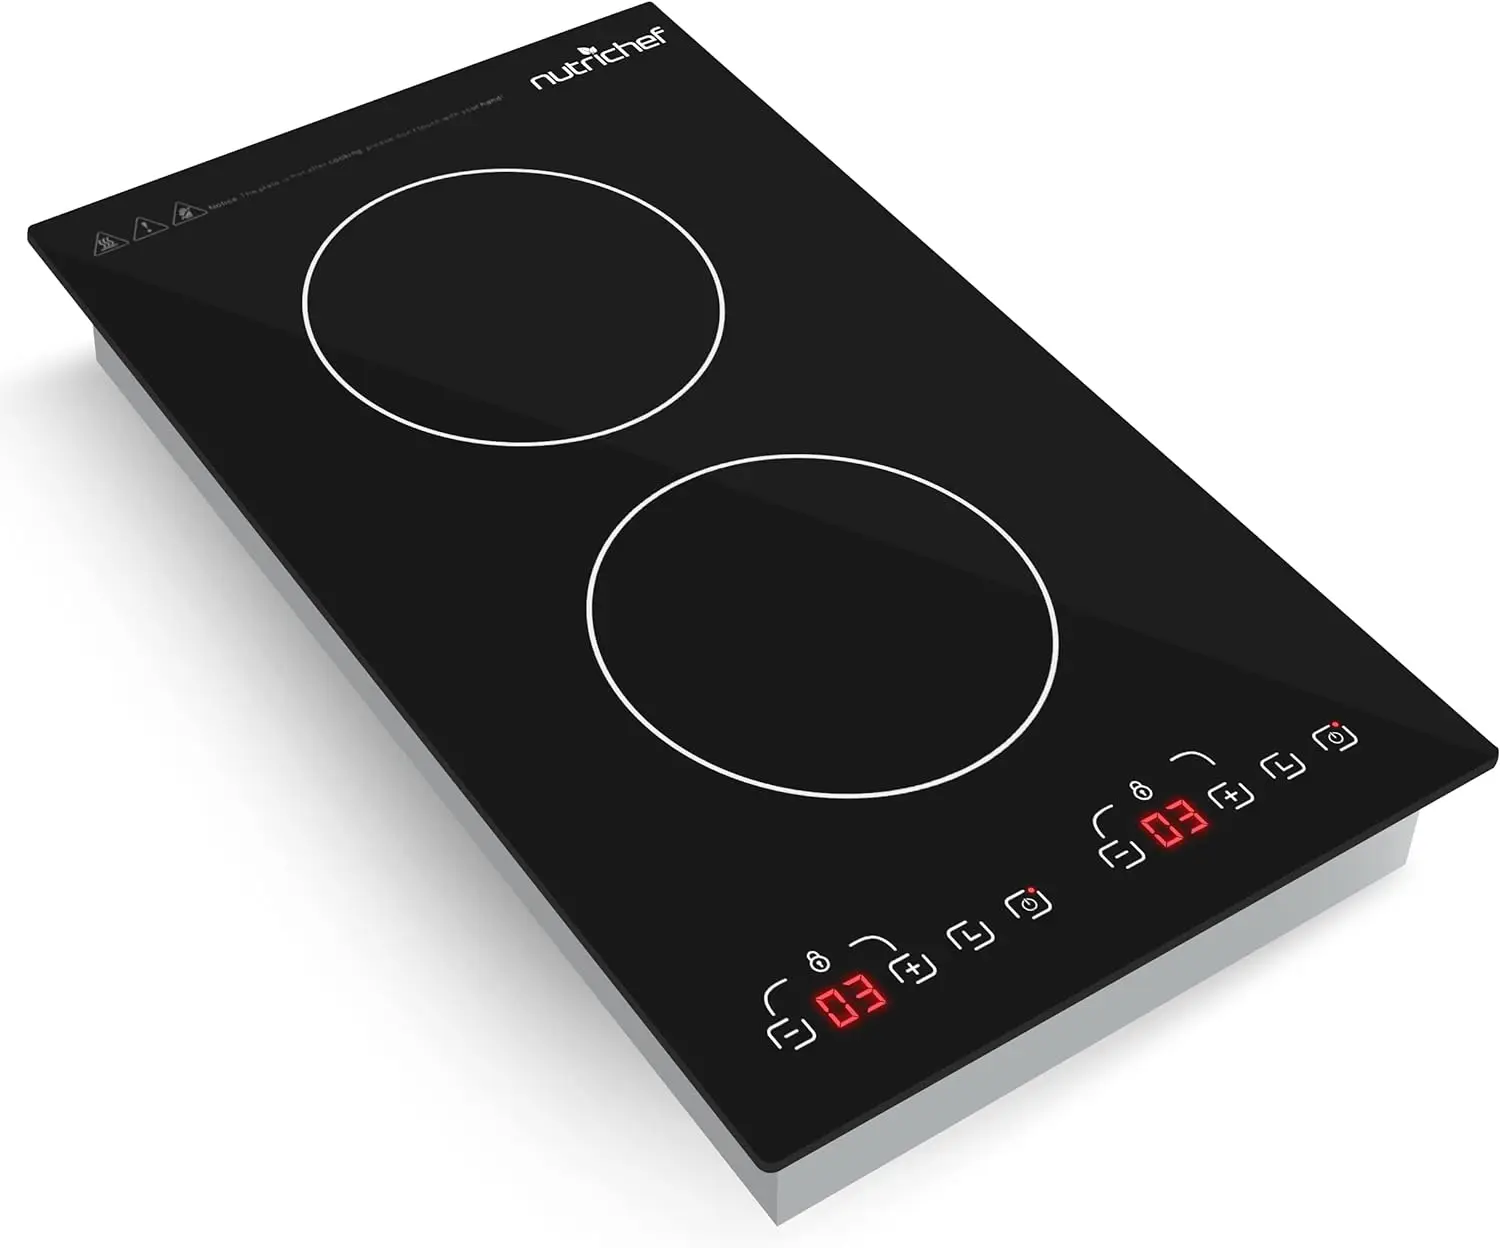 

Cooktop - 120V 2 Glass Induction Burner Zones with Adjustable Temperature Settings - 1800W Induction Cooker with Digital Touch